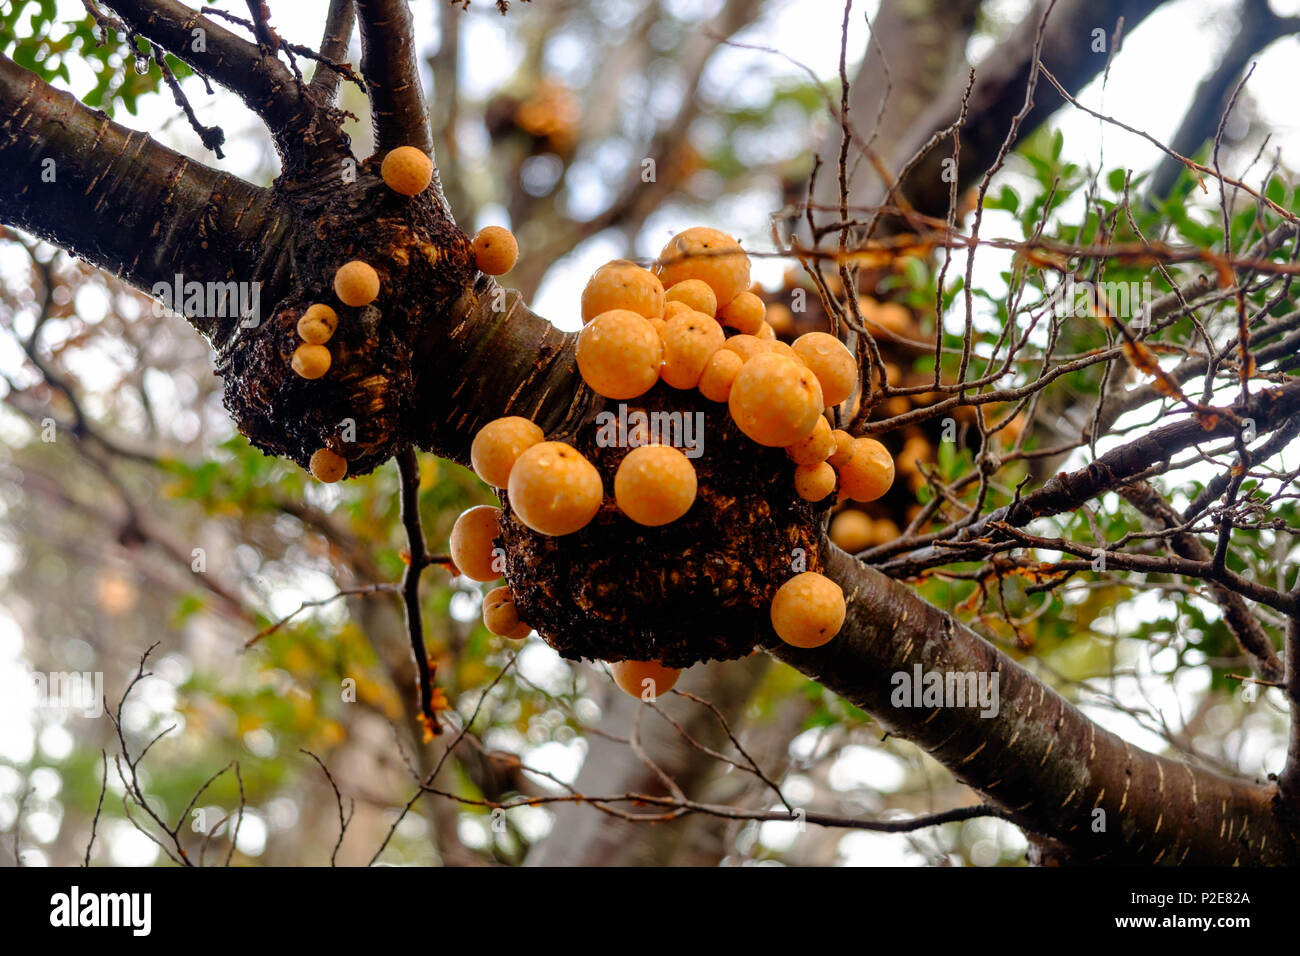 'Pan de indio' is an edible mushroom. This orange fungus grows often on lenga trees, like here in Tierra del Fuego national park in Argentina. Stock Photo